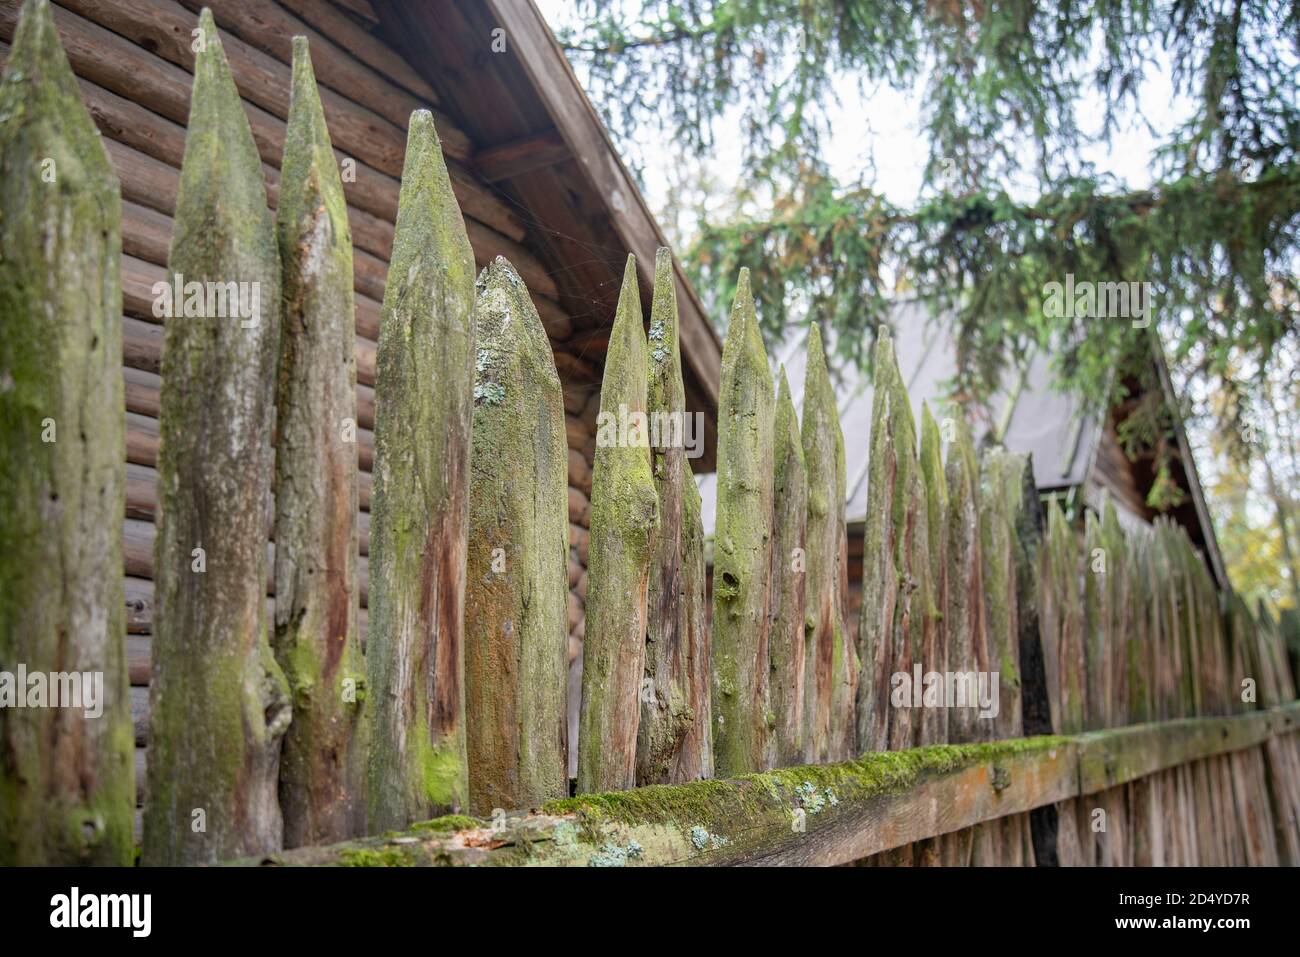 ancient style wooden wall Palisade. High wooden antique palisade. Fence made of sharp wooden stakes on the background of logs. ancient style wooden Stock Photo